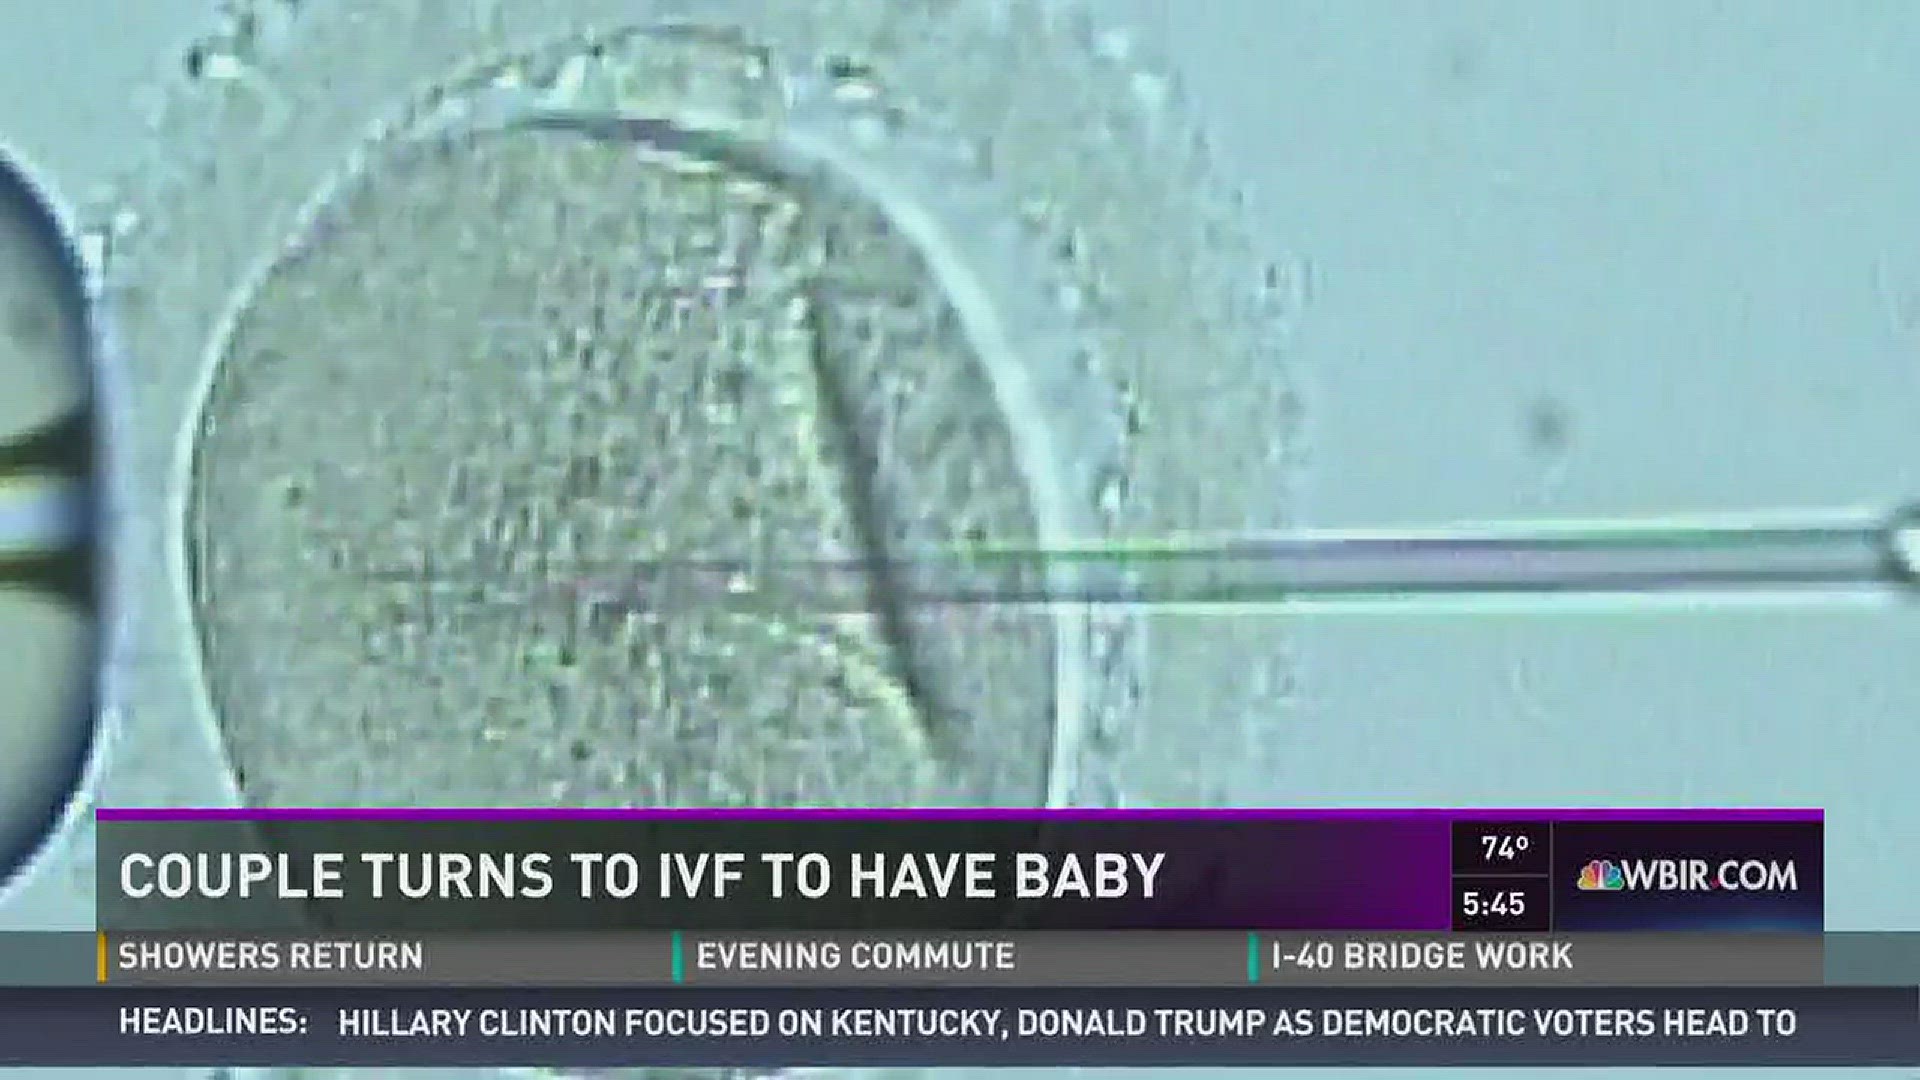 As part of our Infertility series, we're taking a closer look at In Vitro Fertilization or IVF. US doctors began using the assisted reproductive technology in 1981, and in 2014, more than 65,000 babies were born primarily through IVF.